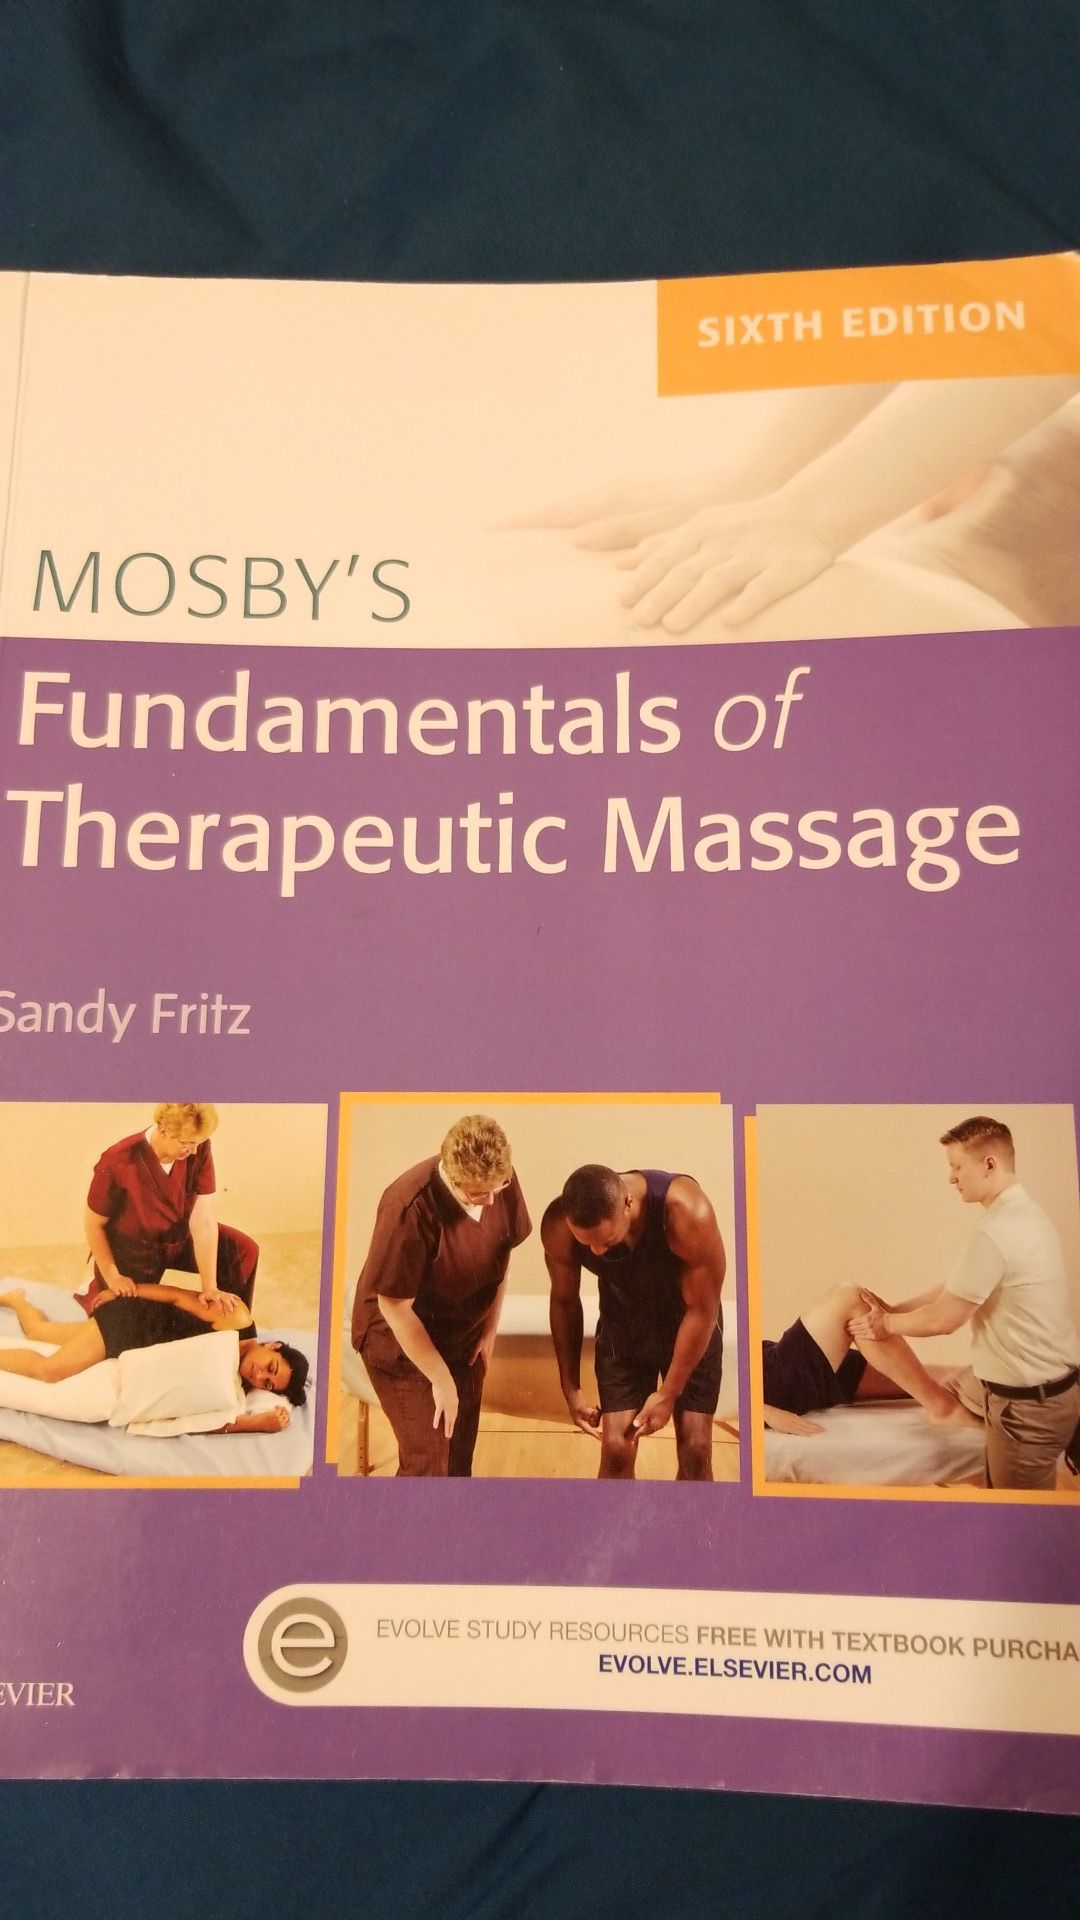 Mosby's Fundamentals of Therapeutic Massage (Sixth Edition)